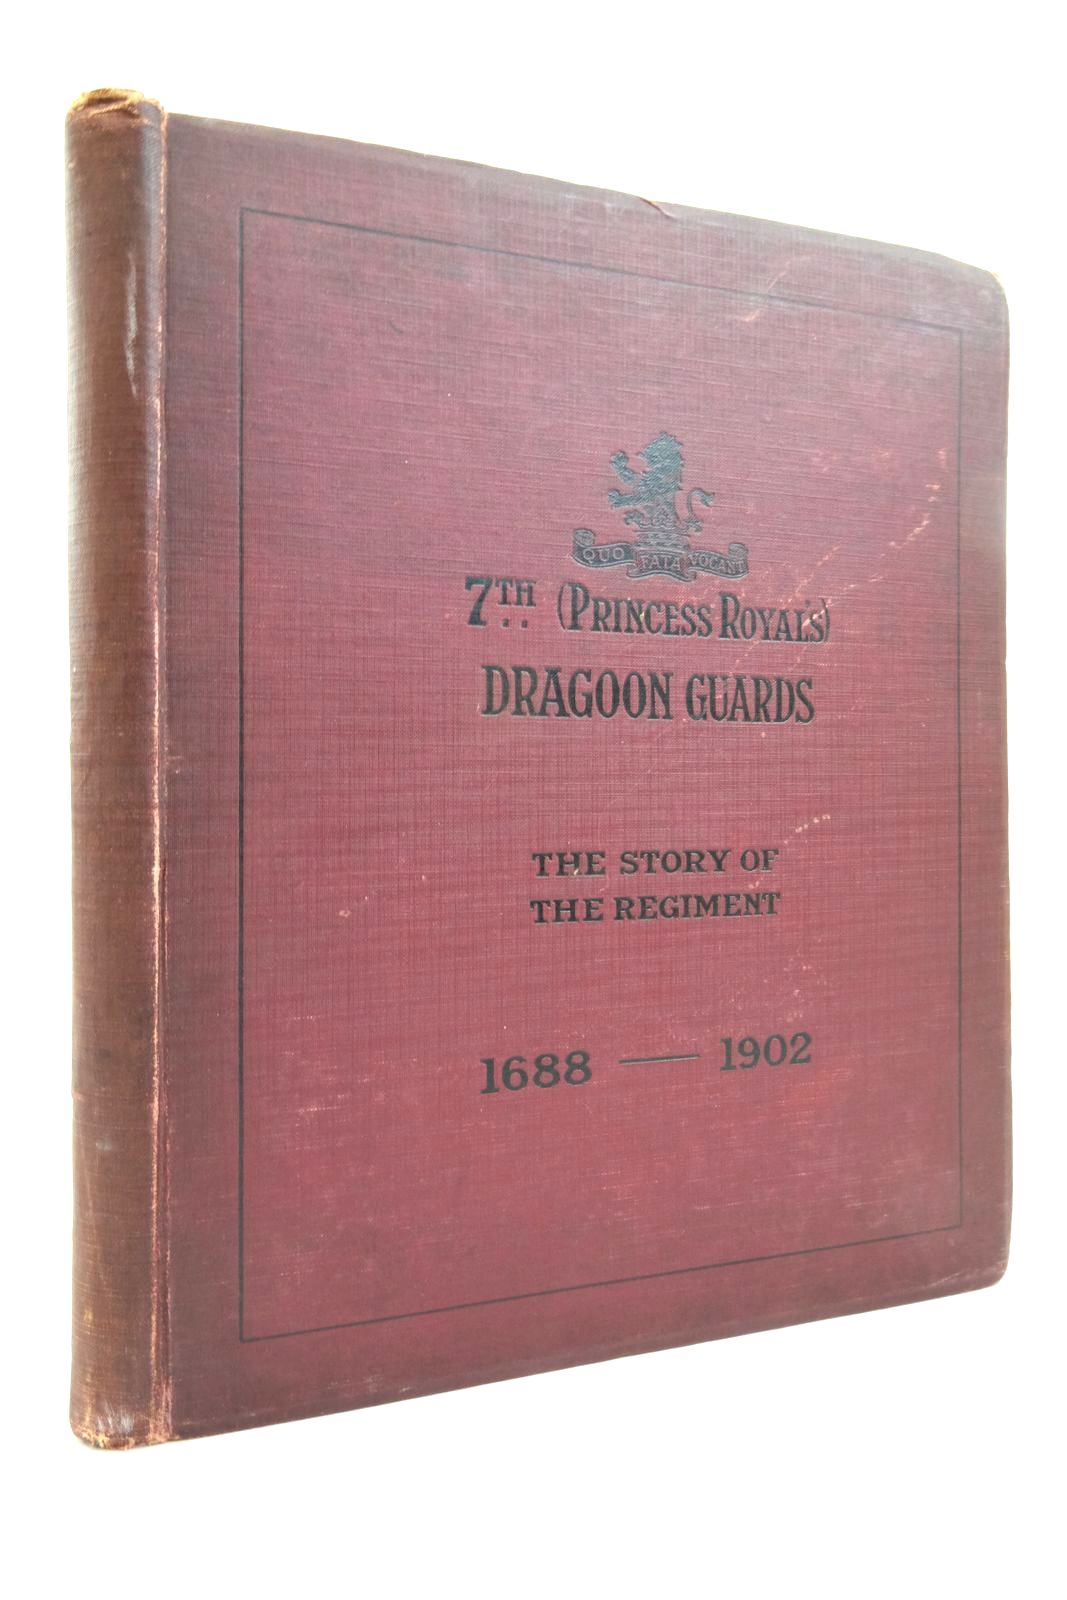 Photo of SEVENTH (PRINCESS ROYAL'S) DRAGOON GUARDS: THE STORY OF THE REGIMENT (1688-1882) AND WITH THE REGIMENT IN SOUTH AFRICA (1900-1902) written by Thompson, C.W. Campbell, N.D.H. Whetherly, W.S. Holland, J.E.D. (STOCK CODE: 2137722)  for sale by Stella & Rose's Books